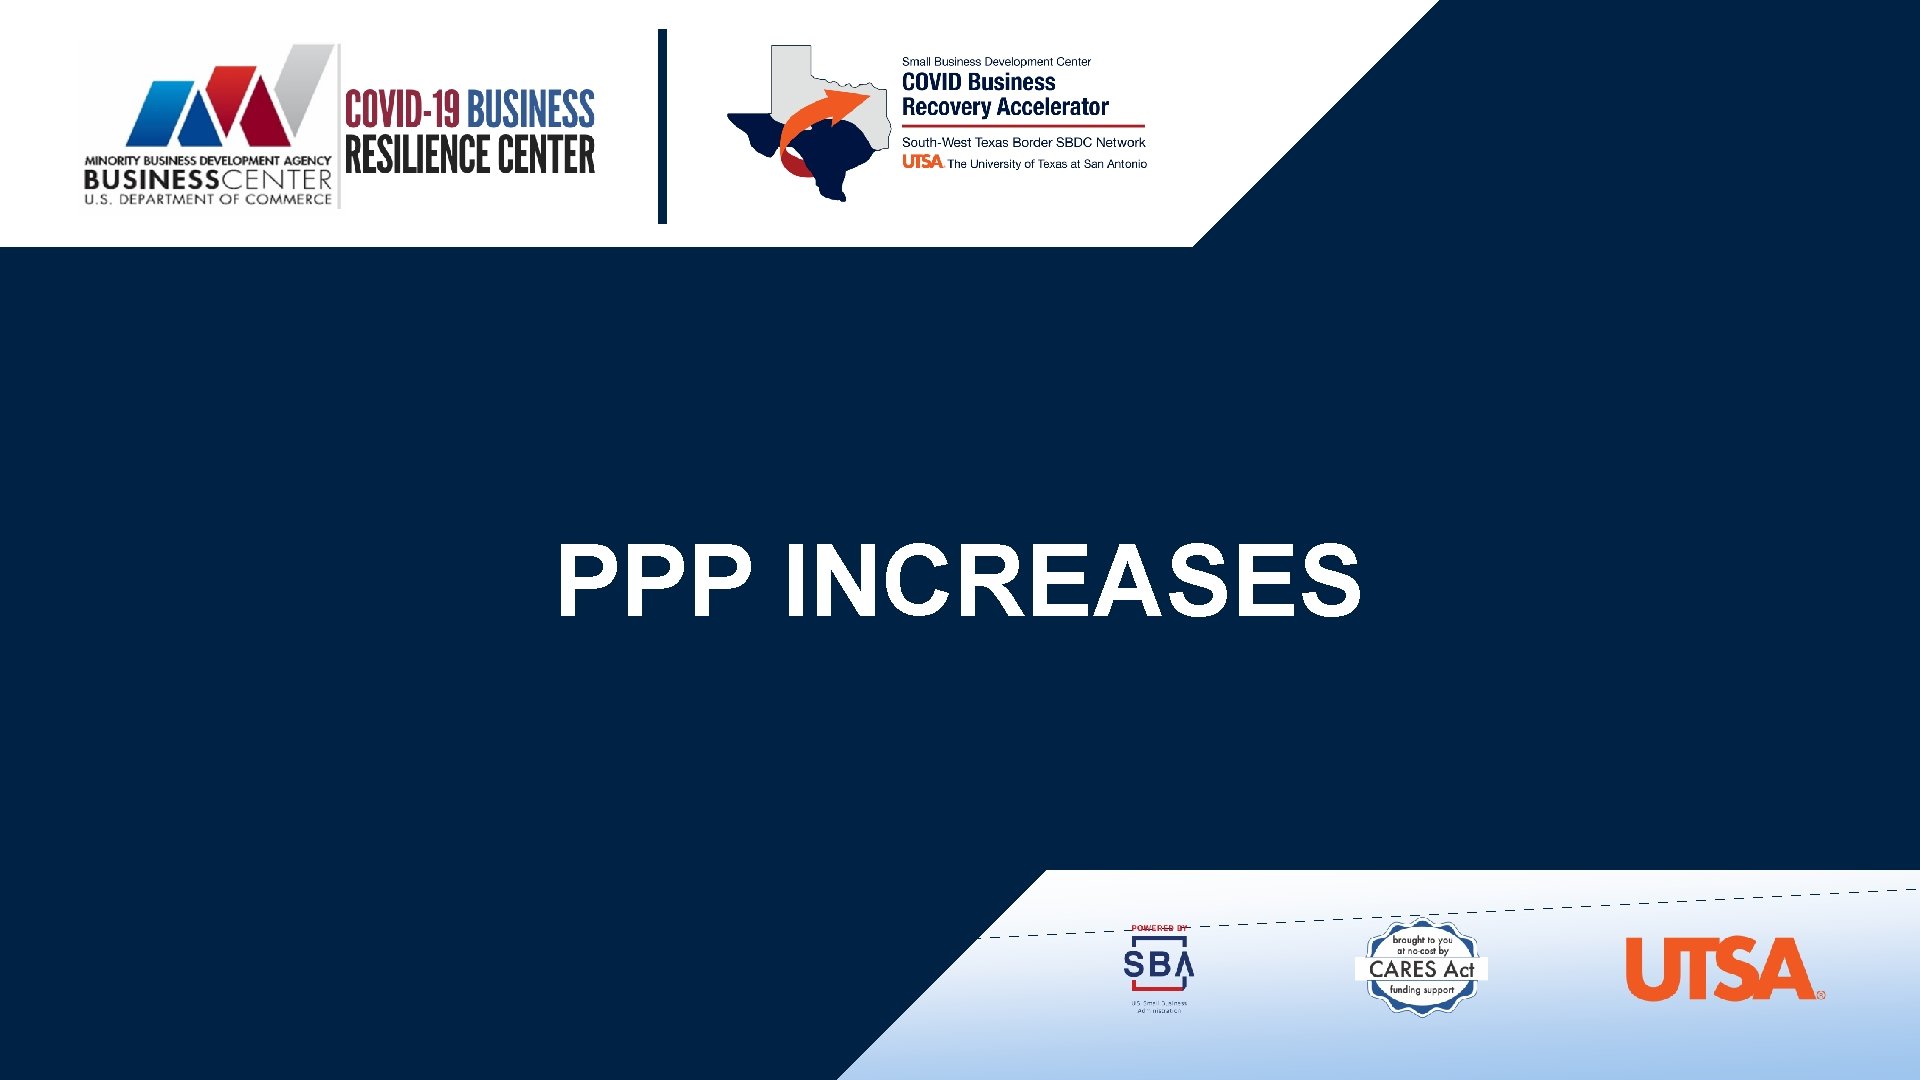 PPP INCREASES 